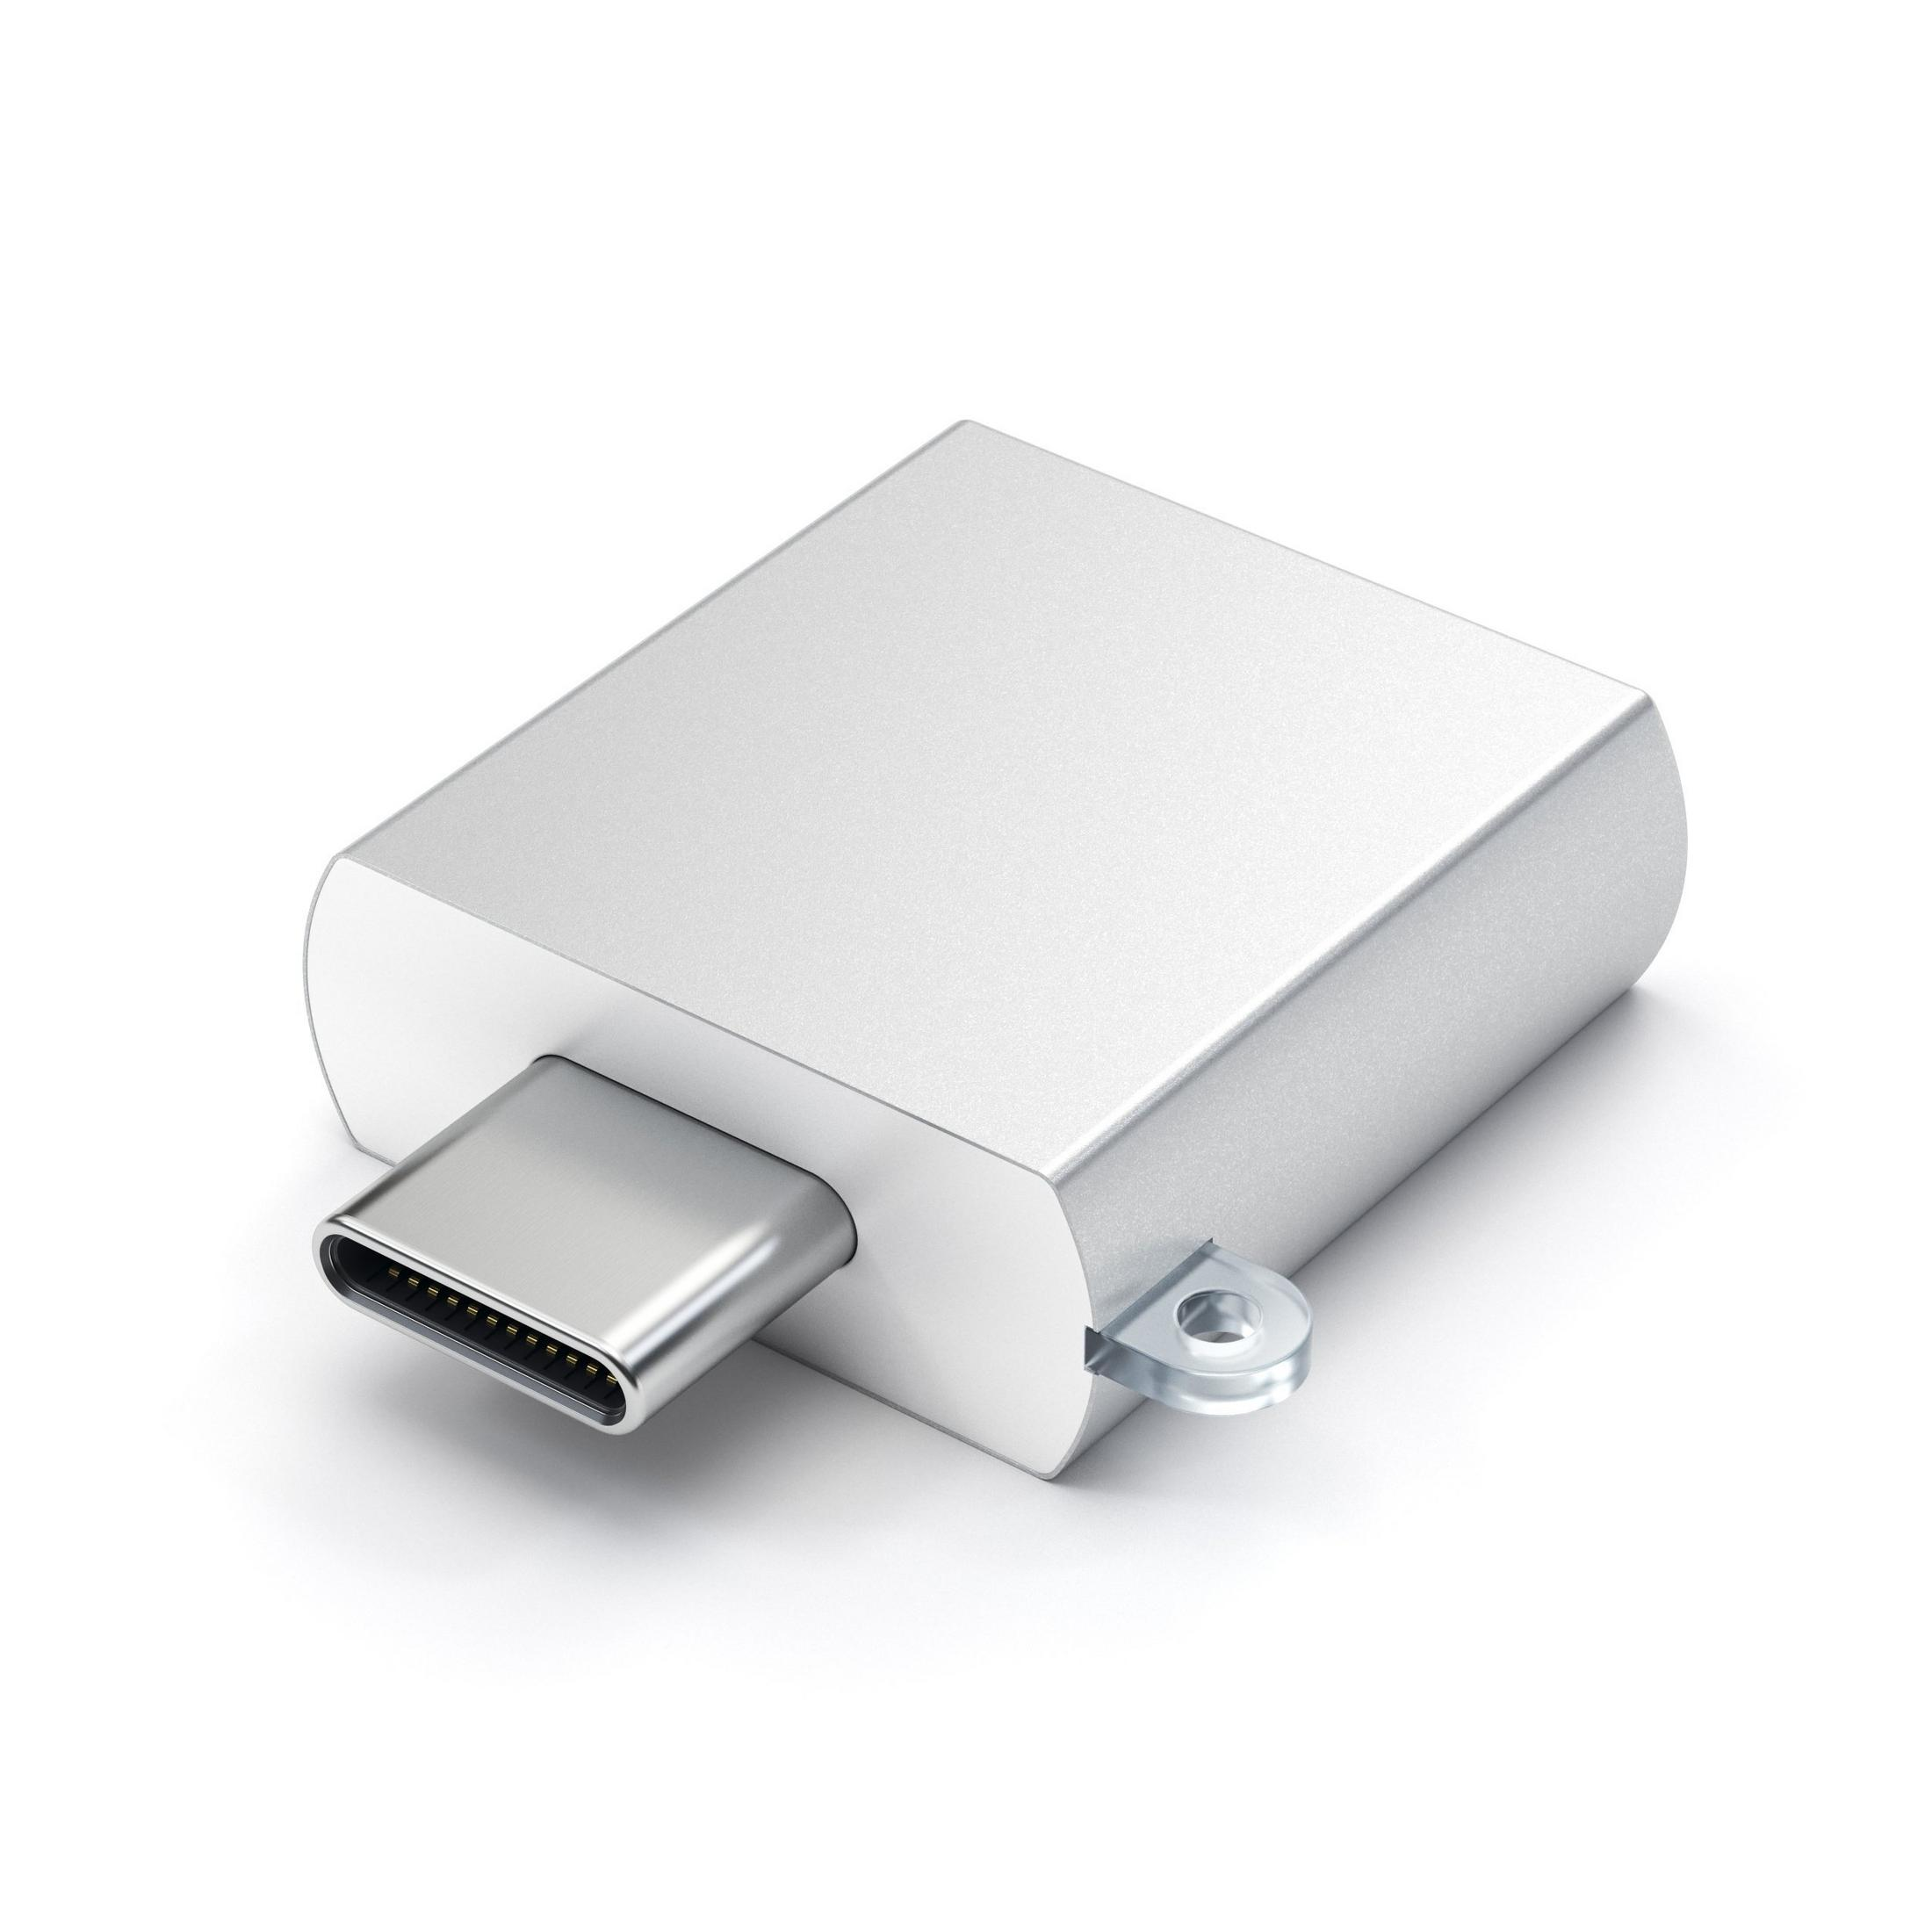 USB SILBER 179965 Silber ADAPTER TYPE-C SATECHI Adapter,